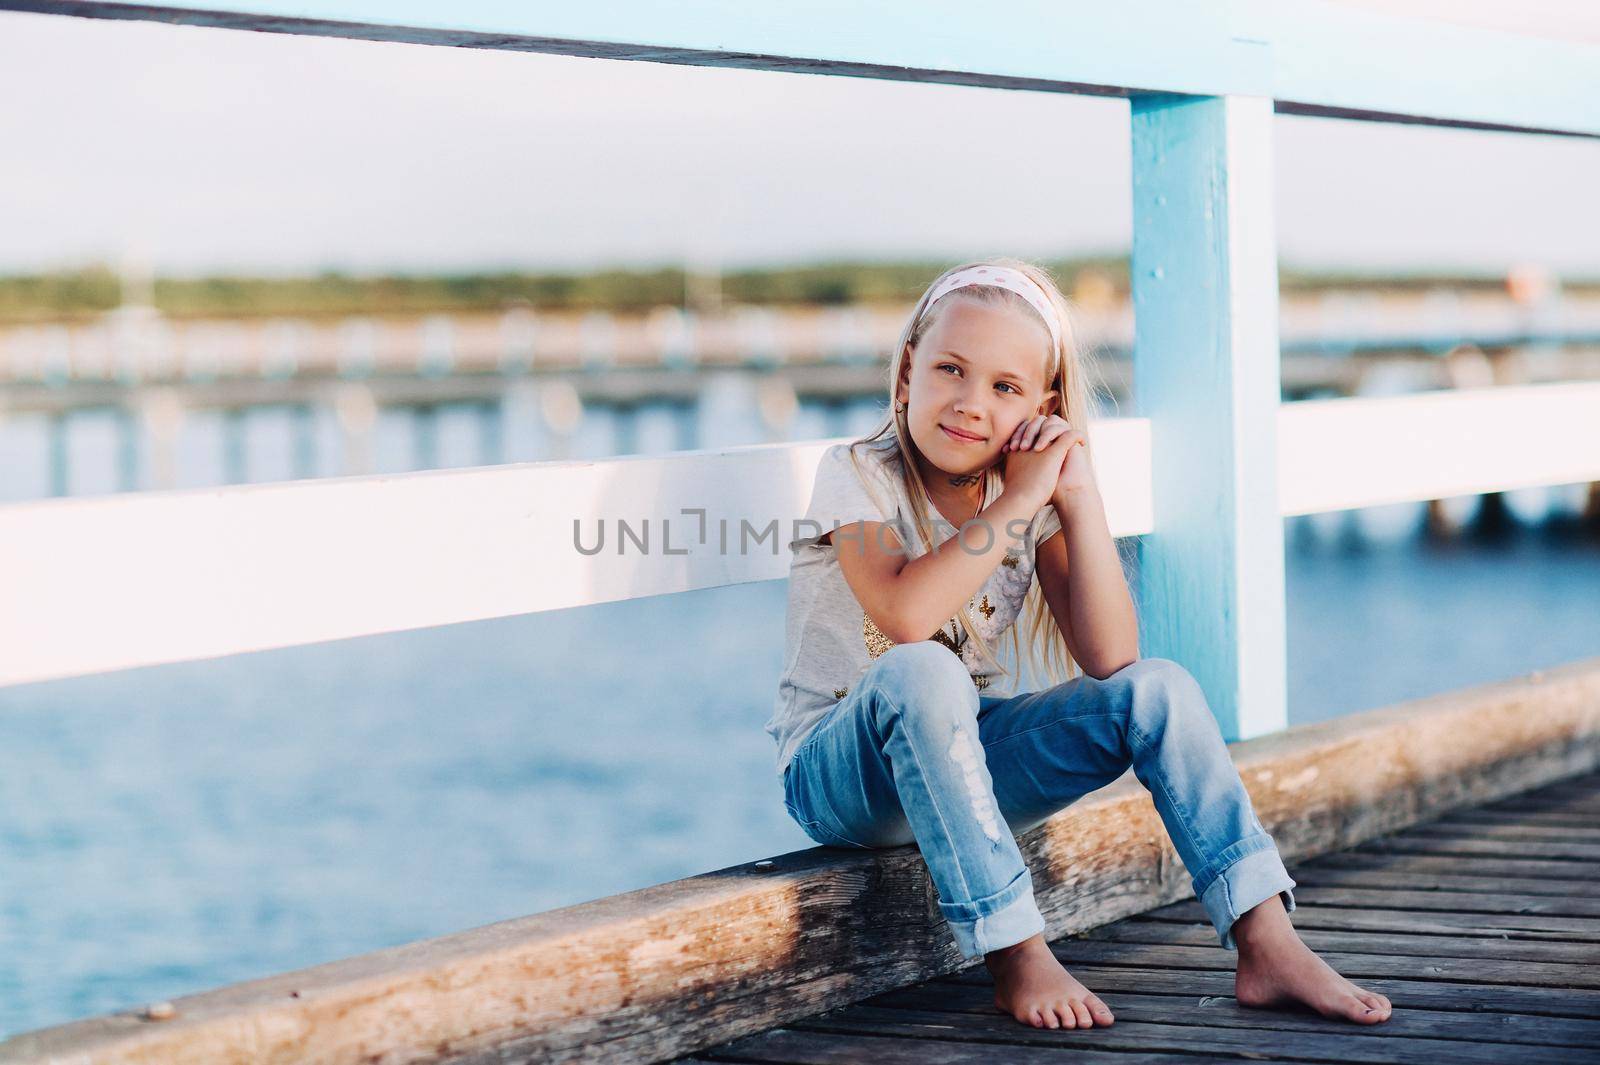 Portrait of a happy little girl sitting on a wooden bridge with sunlight.